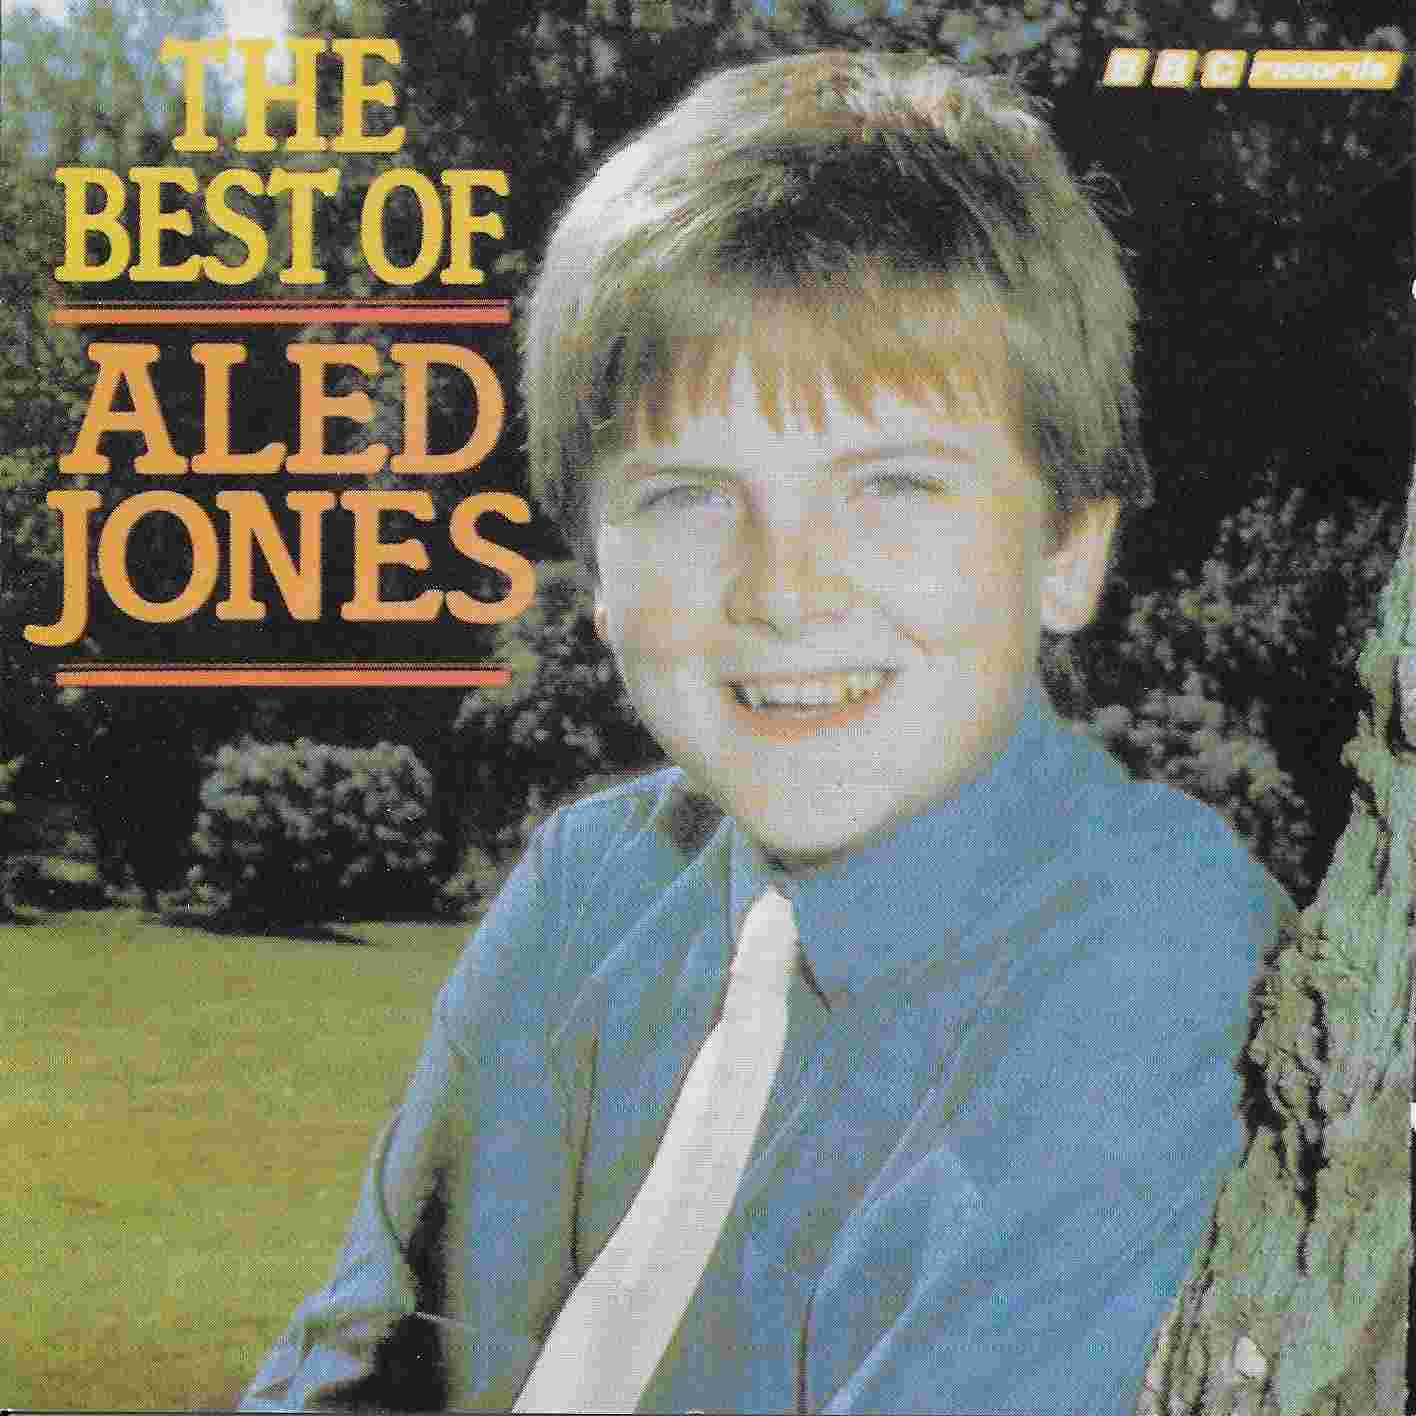 Picture of The best of Aled Jones by artist Various from the BBC cds - Records and Tapes library